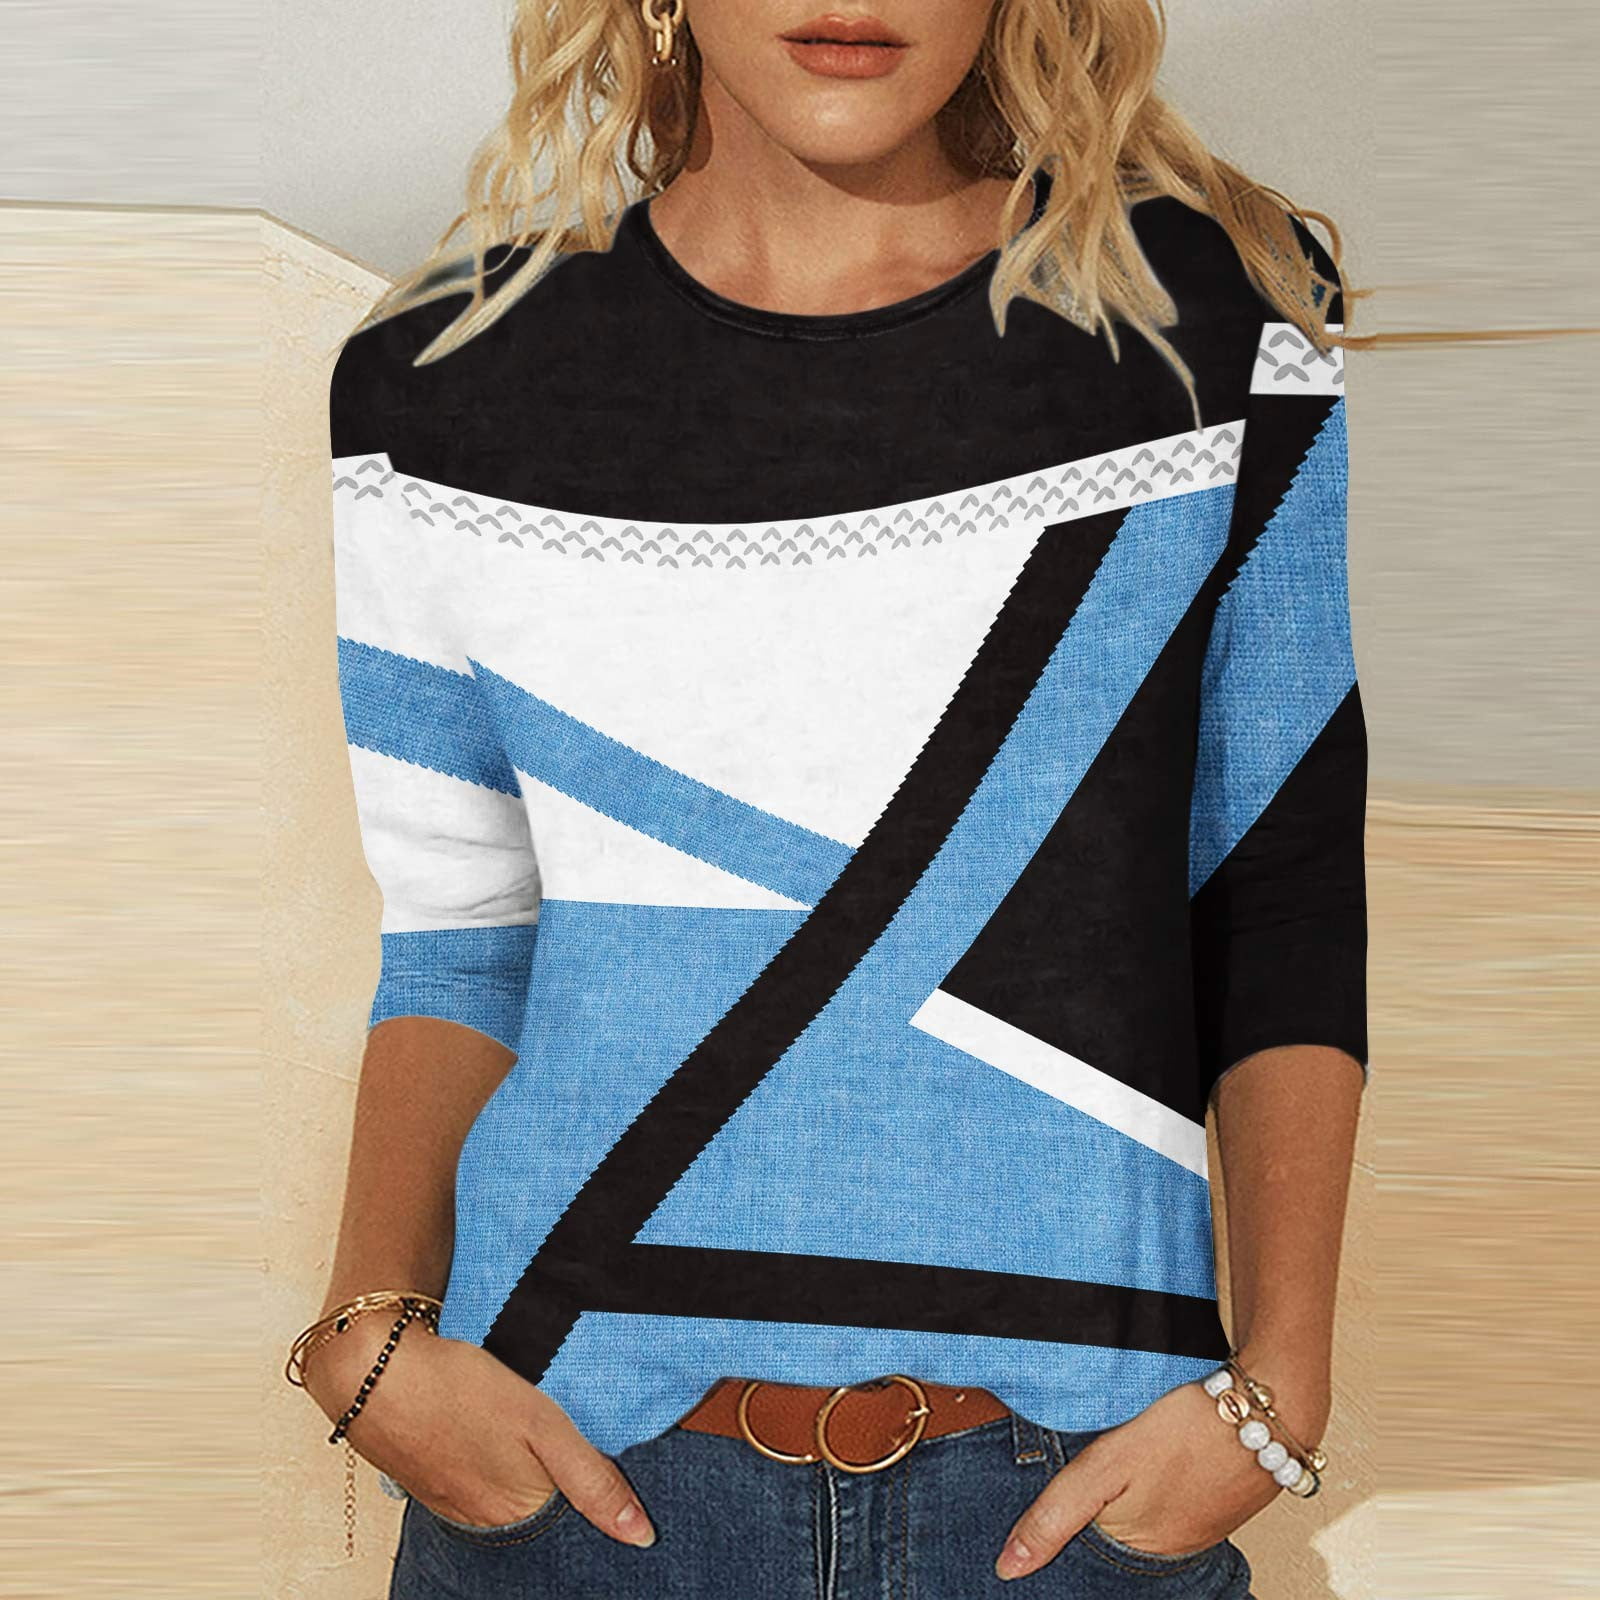 RQYYD Reduced Women's Summer Geometric Graphic T Shirts Casual